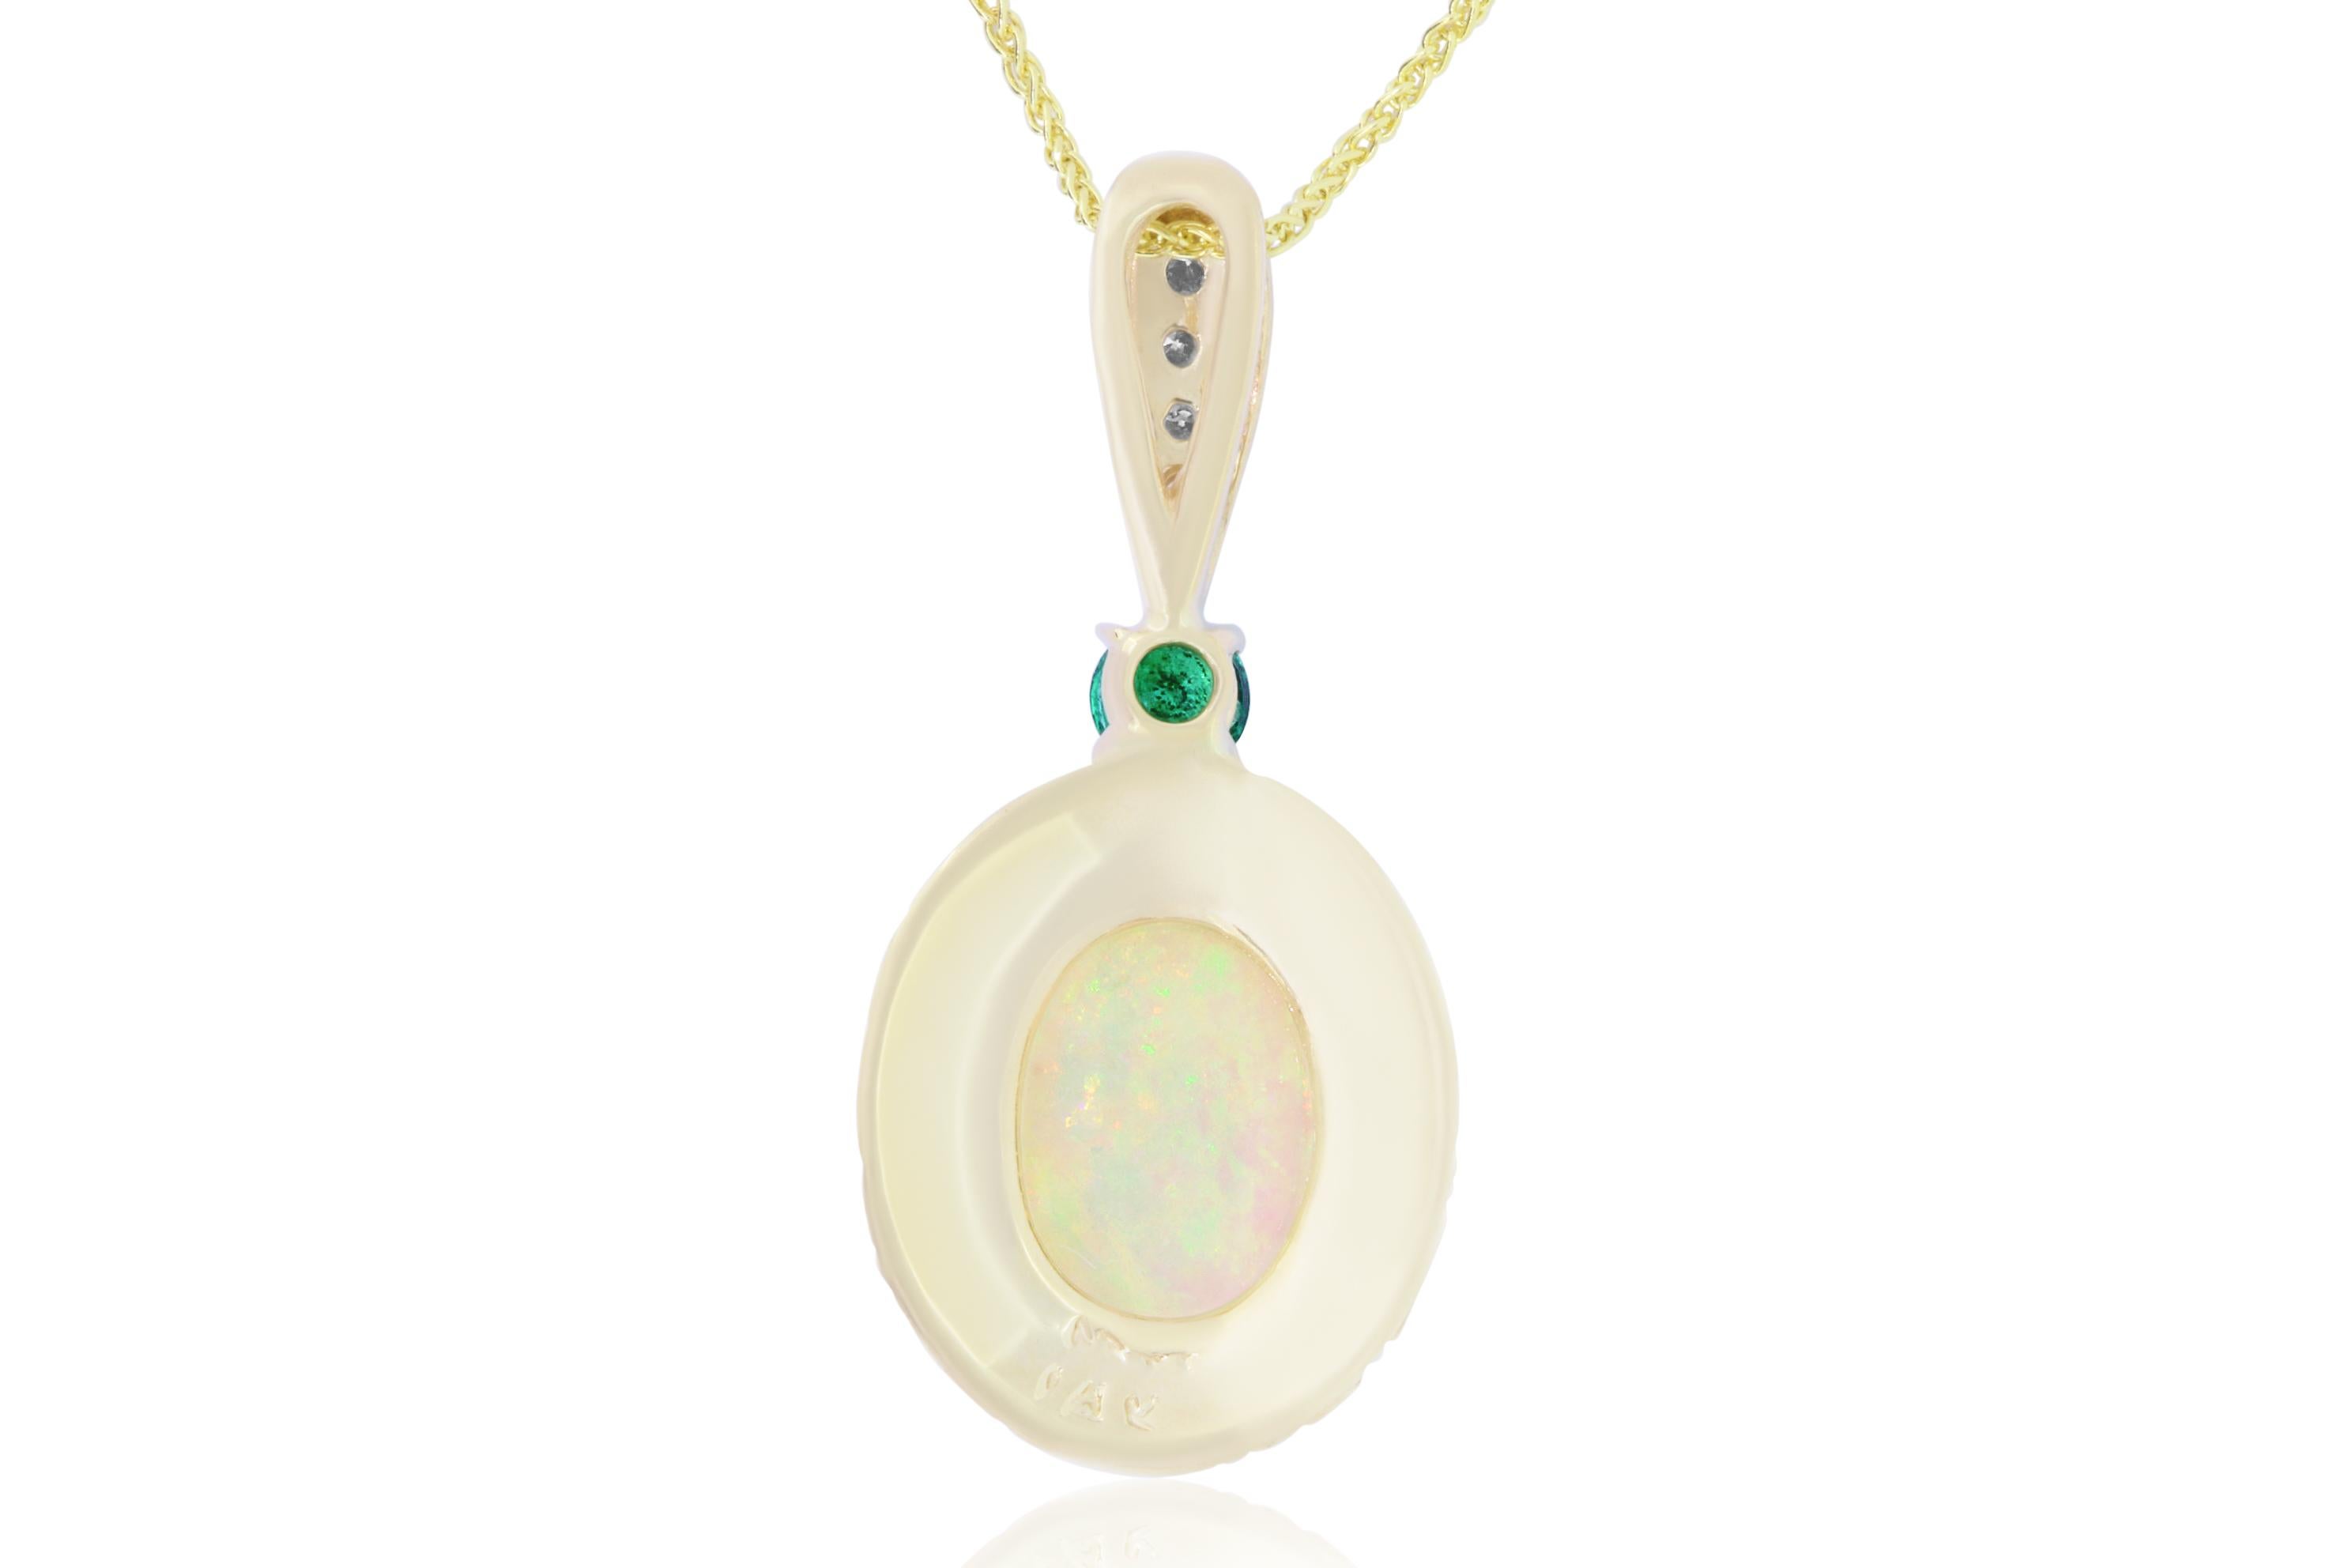 Material: 14k Yellow Gold 
Center Stone Detail:  1 Oval Opal at 1.97 Carats
Mounting Stone Details:  1 Round Emerald at 0.17 carat
Mounting Stone Details: 4 Brilliant Round White Diamonds at 0.10 Carats - Clarity: SI / Color
Chain Length:  18